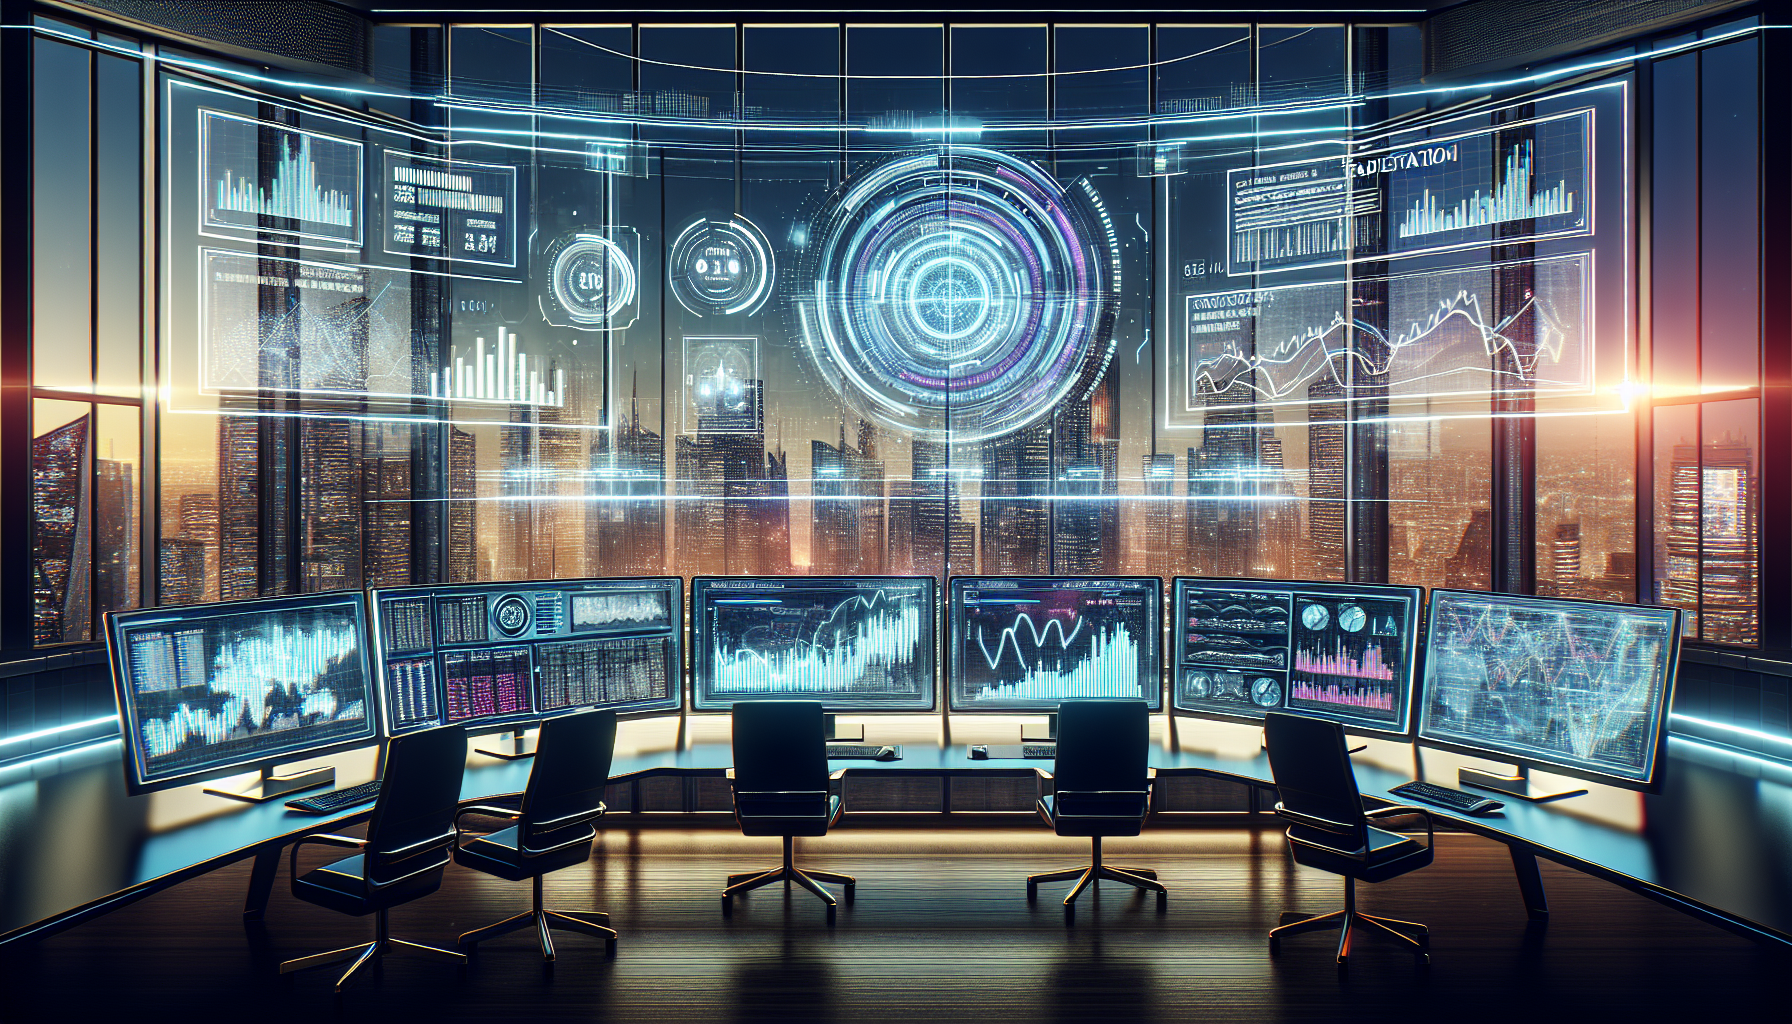 Create an image of a futuristic financial trading desk with multiple computer screens displaying charts and graphs. One of the screens prominently shows TradeStation Futures Margin. The background features a large window with a city skyline, symbolizing the financial markets. Include subtle elements like futuristic gadgets and holographic displays to indicate high-tech trading. The overall scene should convey a sense of focus, analysis, and advanced technology in trading futures.